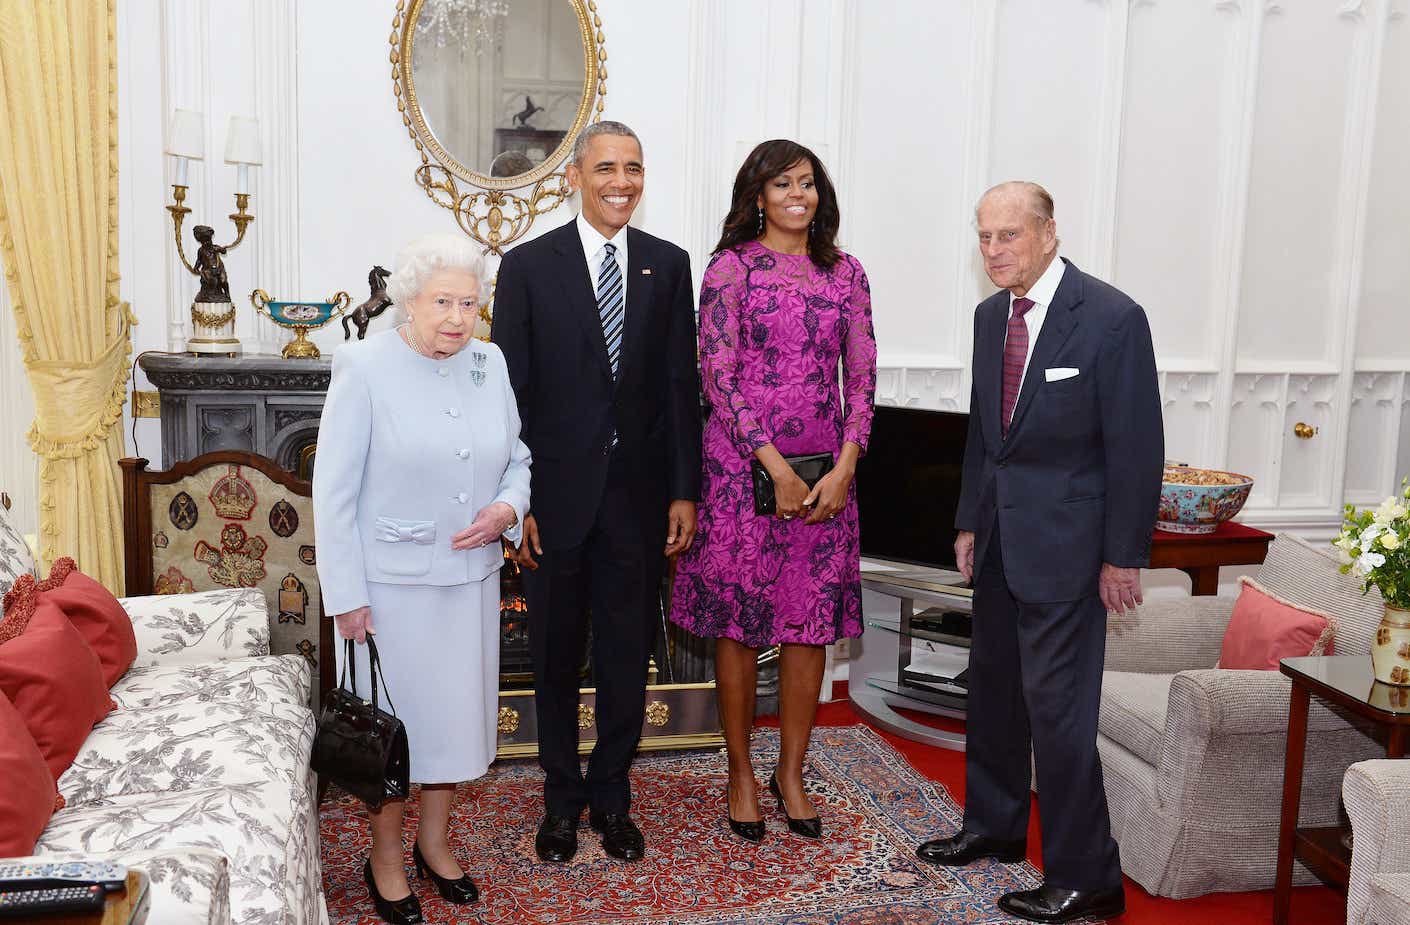 Queen Elizabeth II and Prince Philip stand with US President Barack Obama and First Lady of the United States, Michelle Obama in the Oak Room at Windsor Castle in 2016.